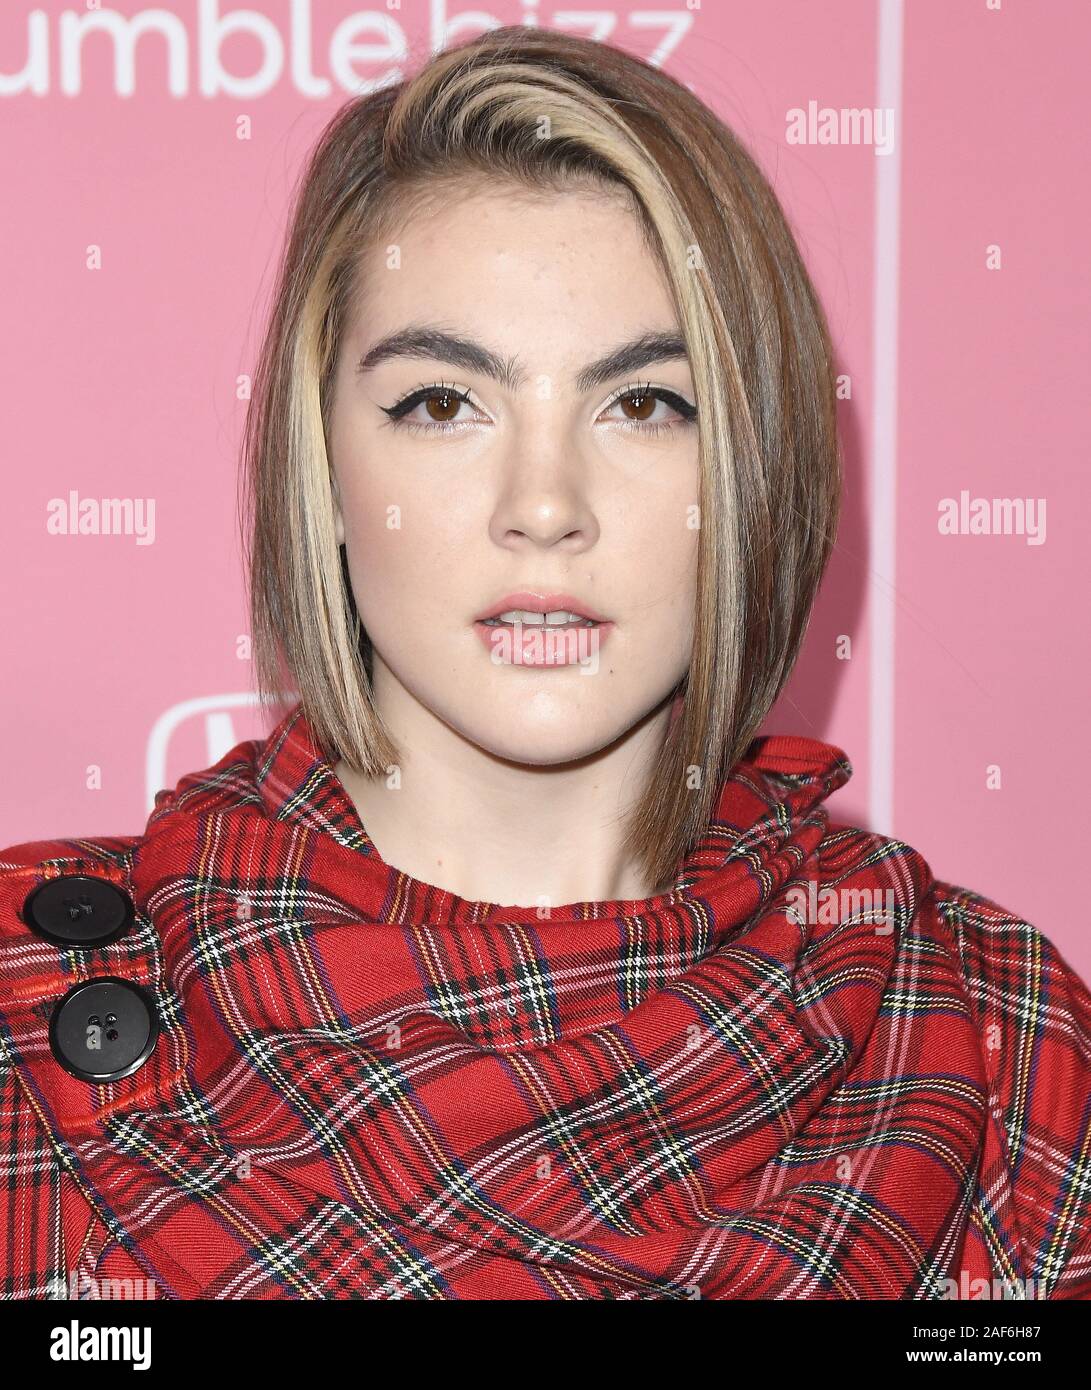 Evie Irie arrives at the 2019 Billboard Women in Music held at the Hollywood Palladium in Los Angeles, CA on Thursday, ?December 12, 2019.  (Photo By Sthanlee B. Mirador/Sipa USA) Stock Photo